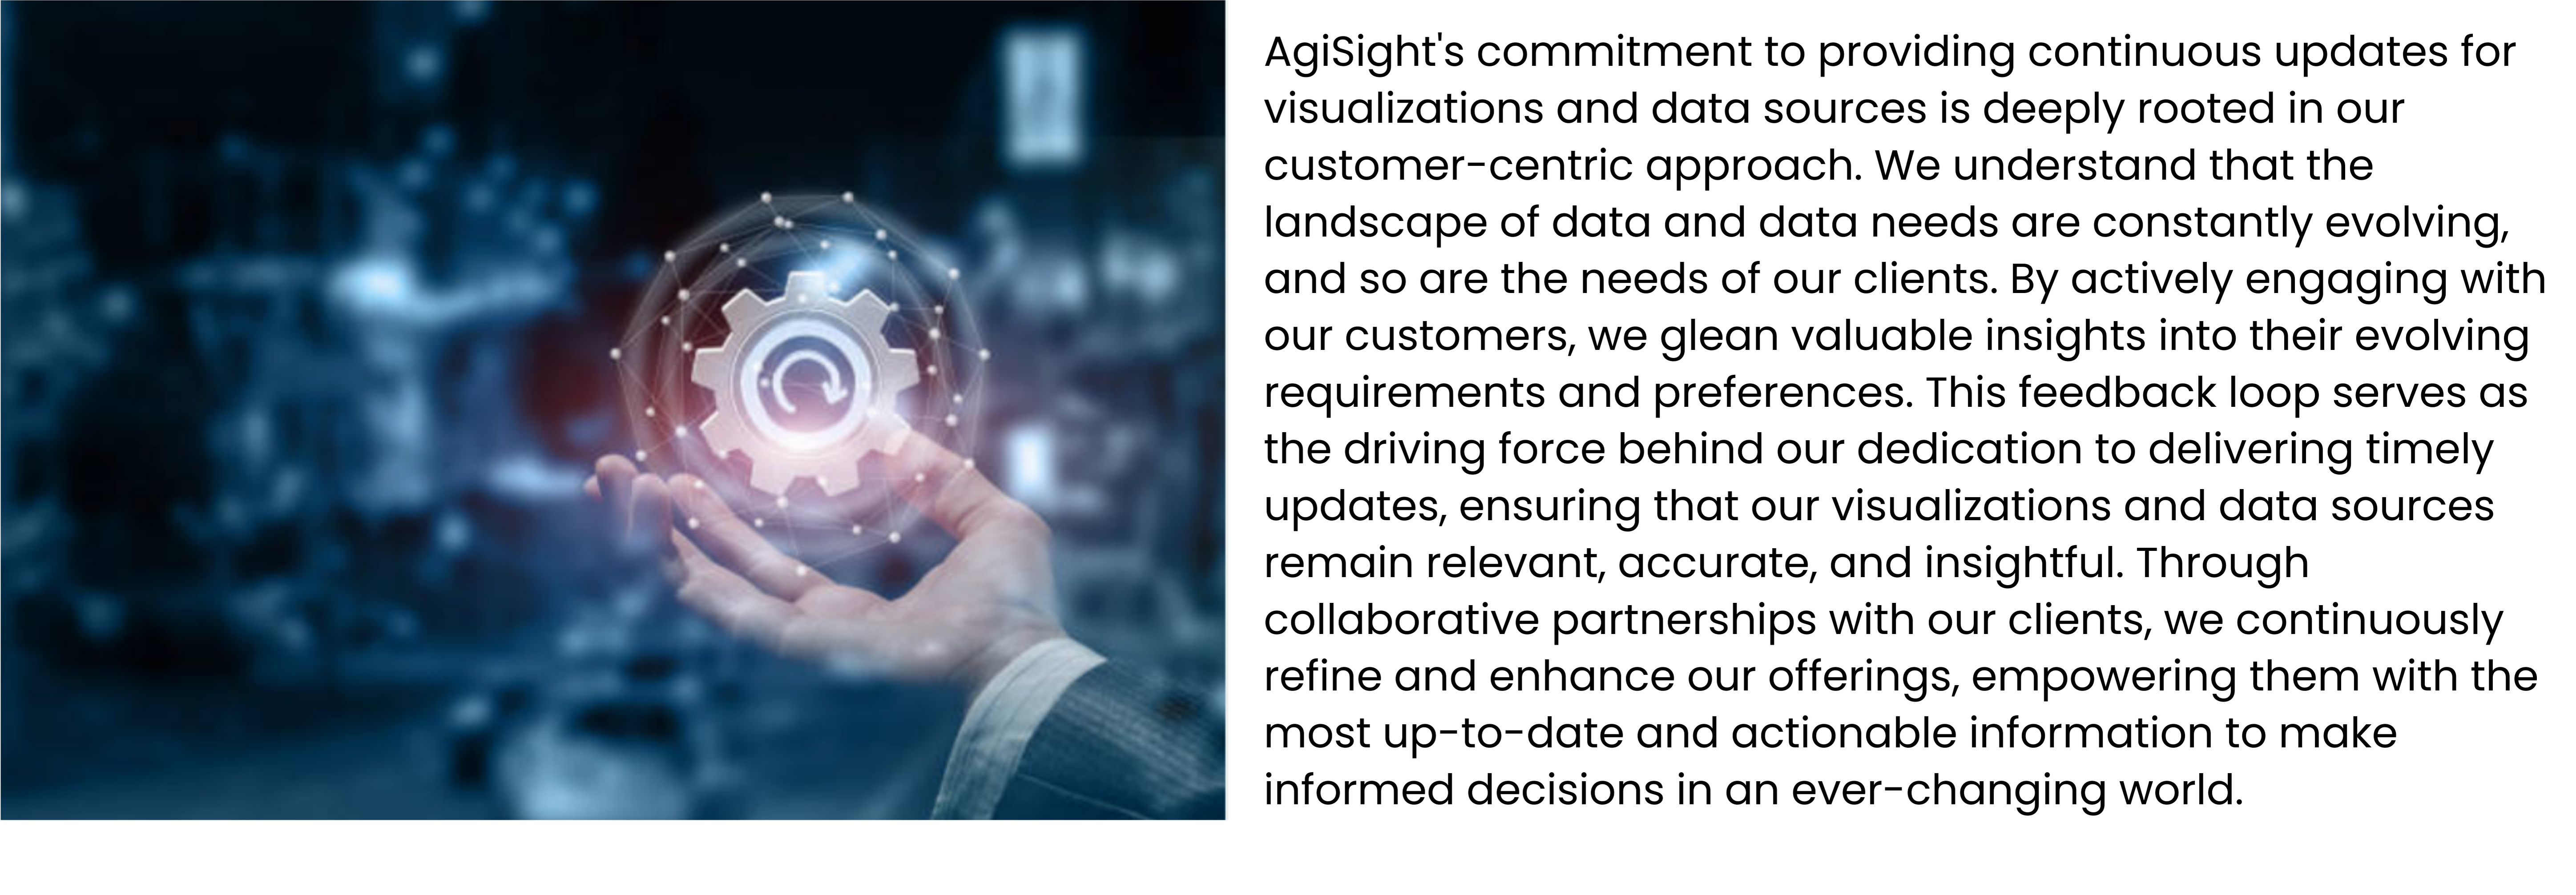 AgiSight's commitment to providing continuous updates for visualizations and data sources is deeply rooted in our customer-centric approach. We understand that the landscape of data and data needs are constantly evolving, and so are the needs of our clients. By actively engaging with our customers, we glean valuable insights into their evolving requirements and preferences. This feedback loop serves as the driving force behind our dedication to delivering timely updates, ensuring that our visualizations and data sources remain relevant, accurate, and insightful. Through collaborative partnerships with our clients, we continuously refine and enhance our offerings, empowering them with the most up-to-date and actionable information to make informed decisions in an ever-changing world.